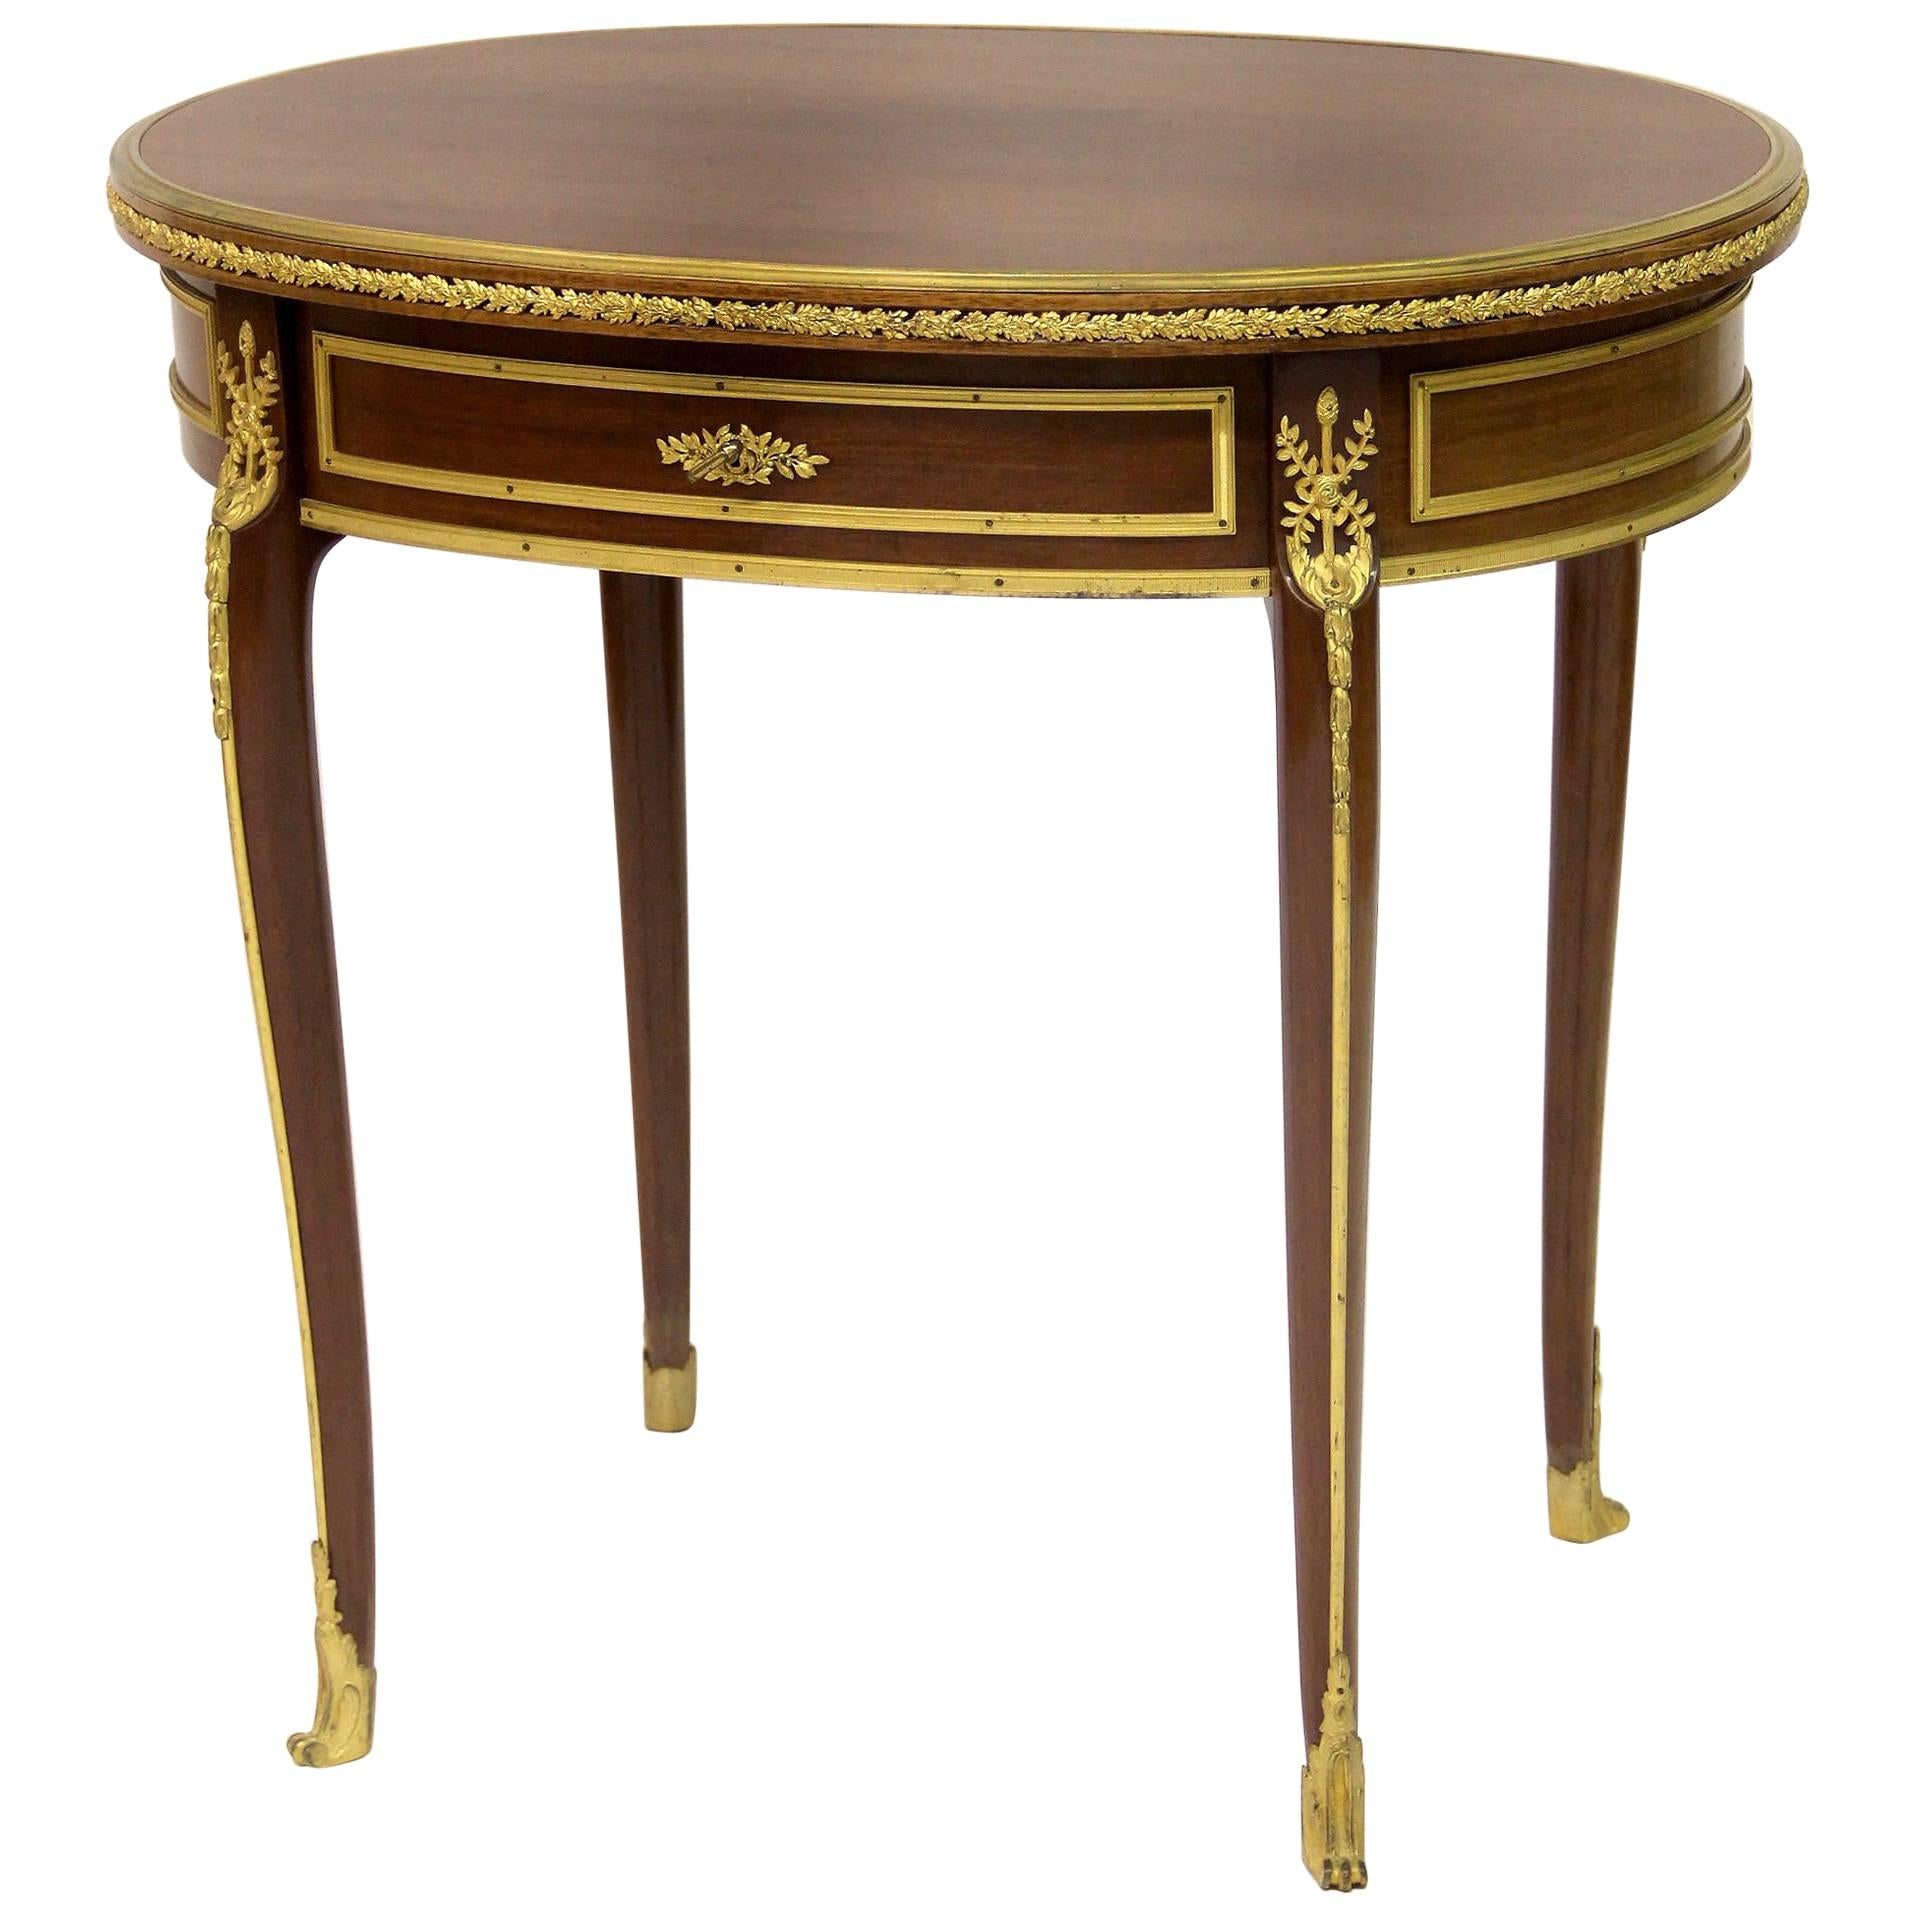 Nice Quality Late 19th Century Gilt Bronze-Mounted Side Table